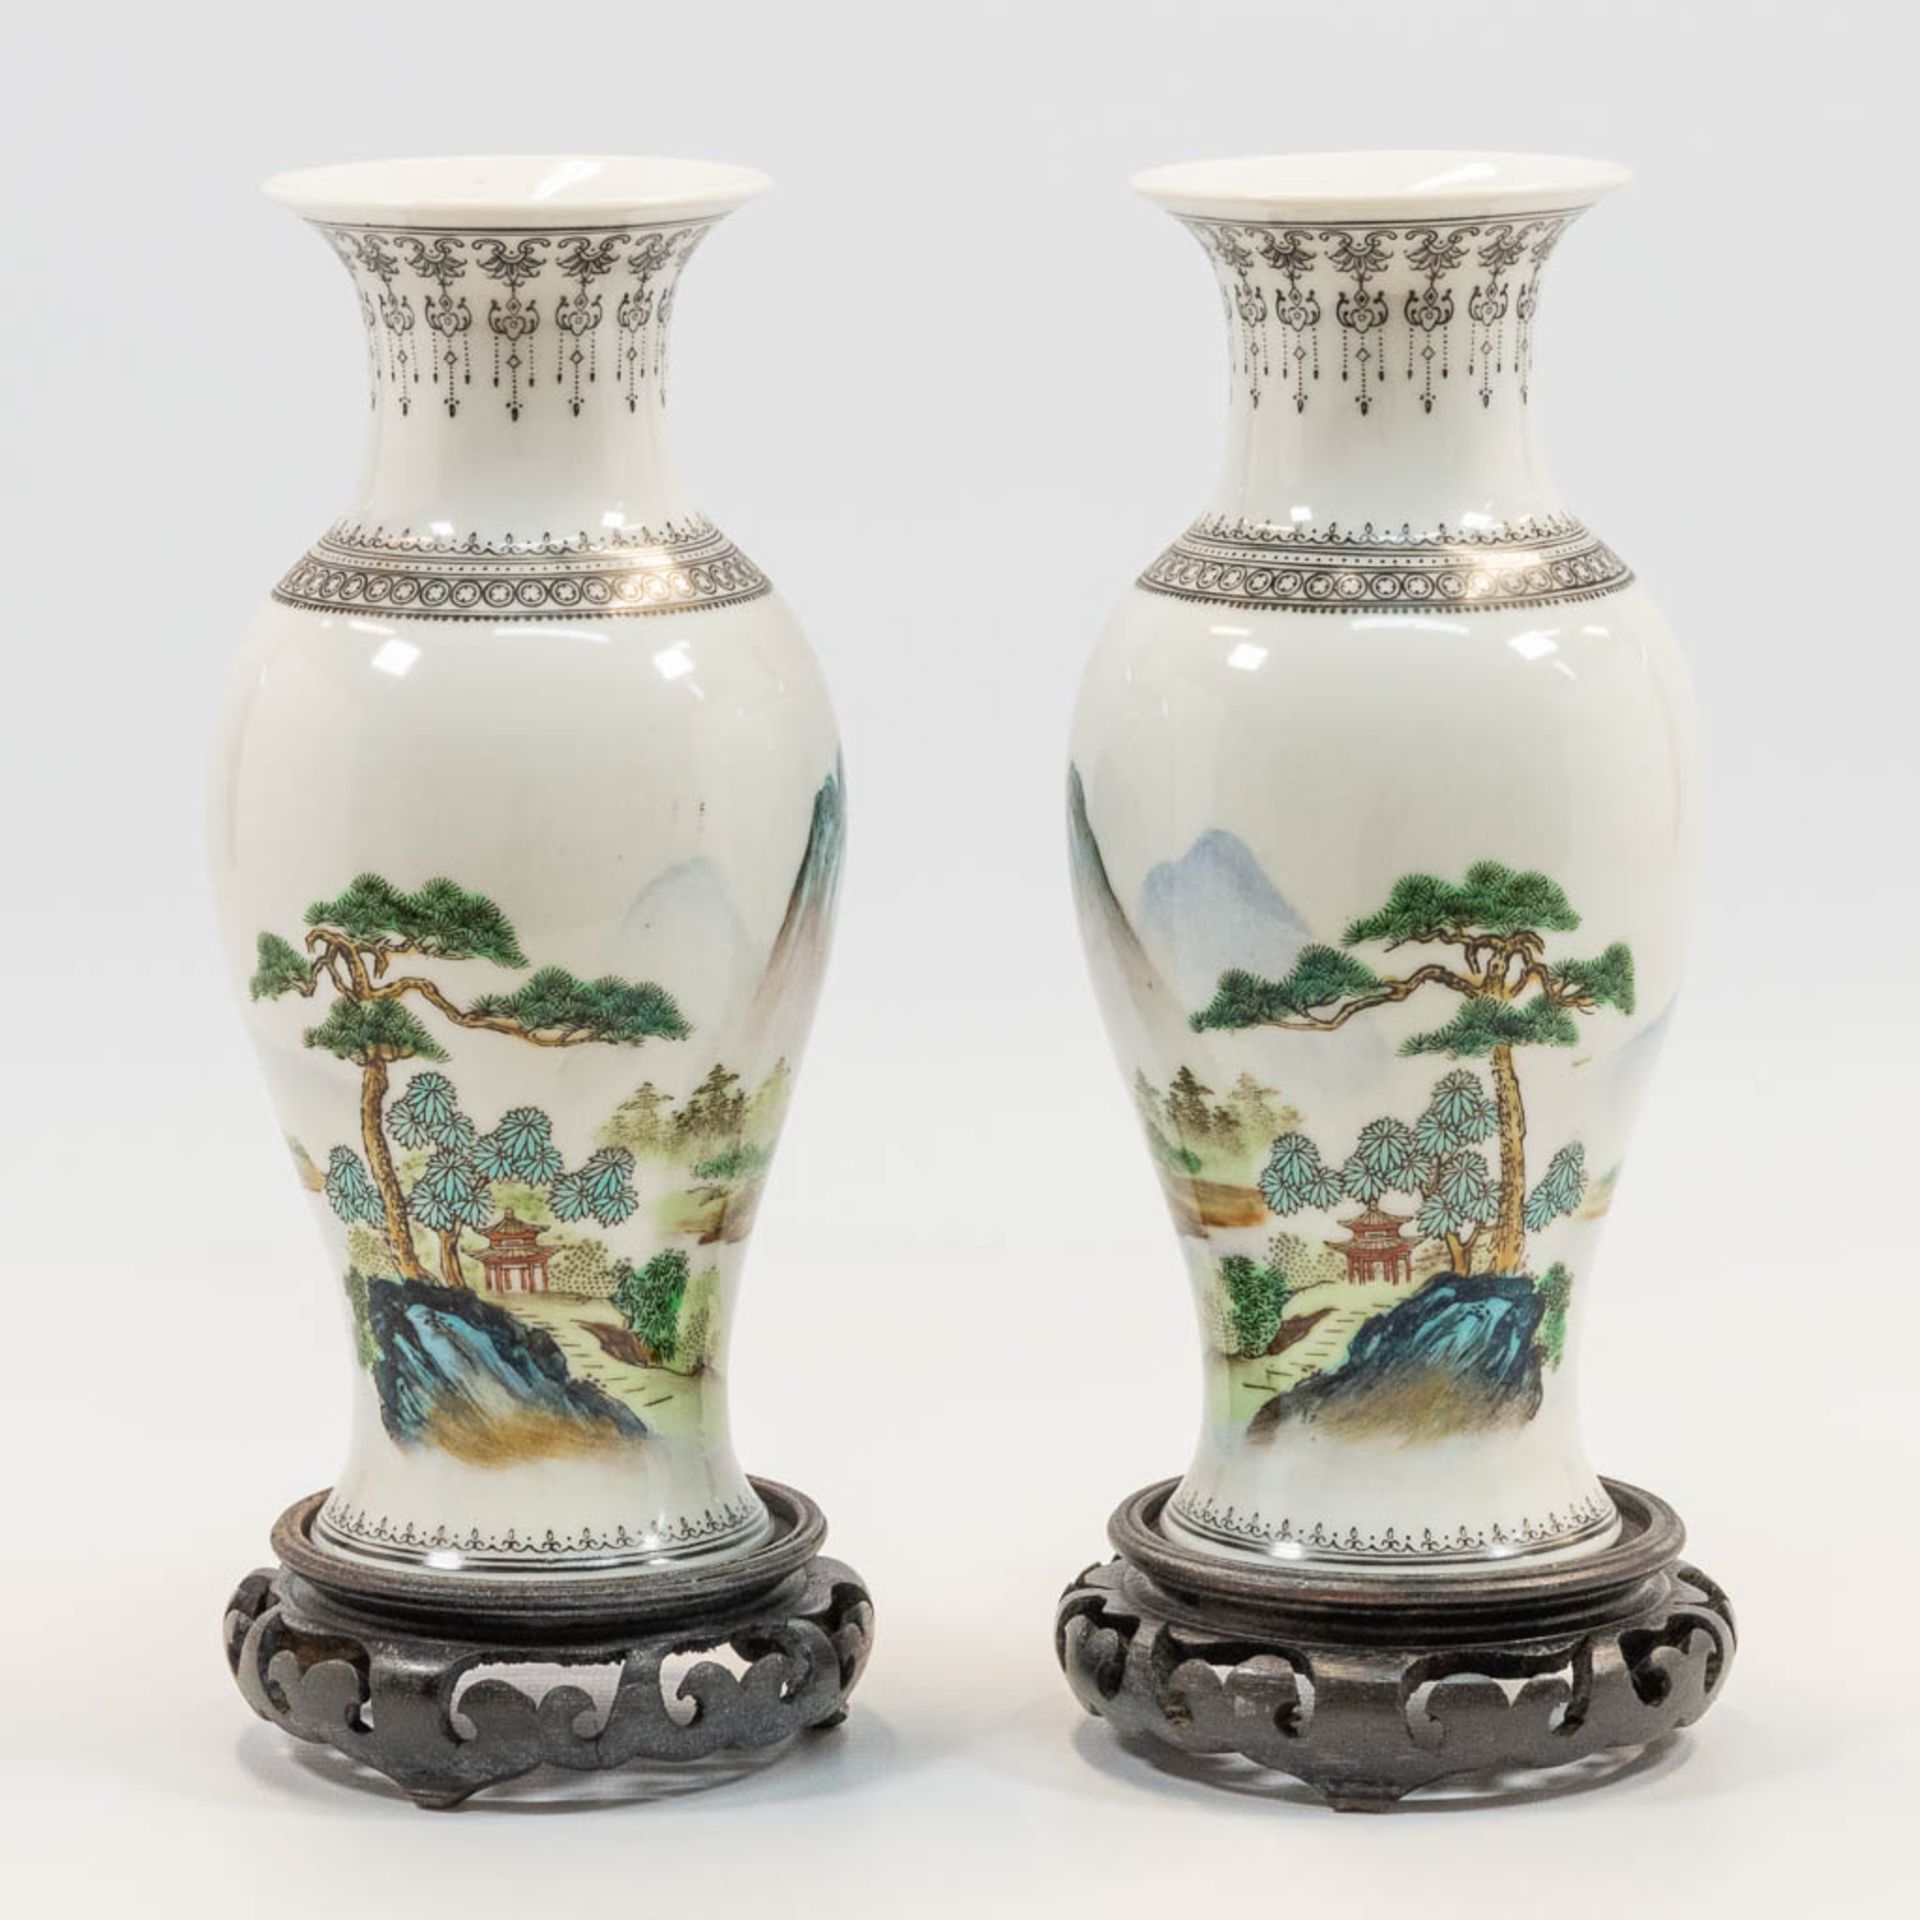 A pair of Chinese vases with hand-painted decor of landscapes with pine trees, Republic period. (20,